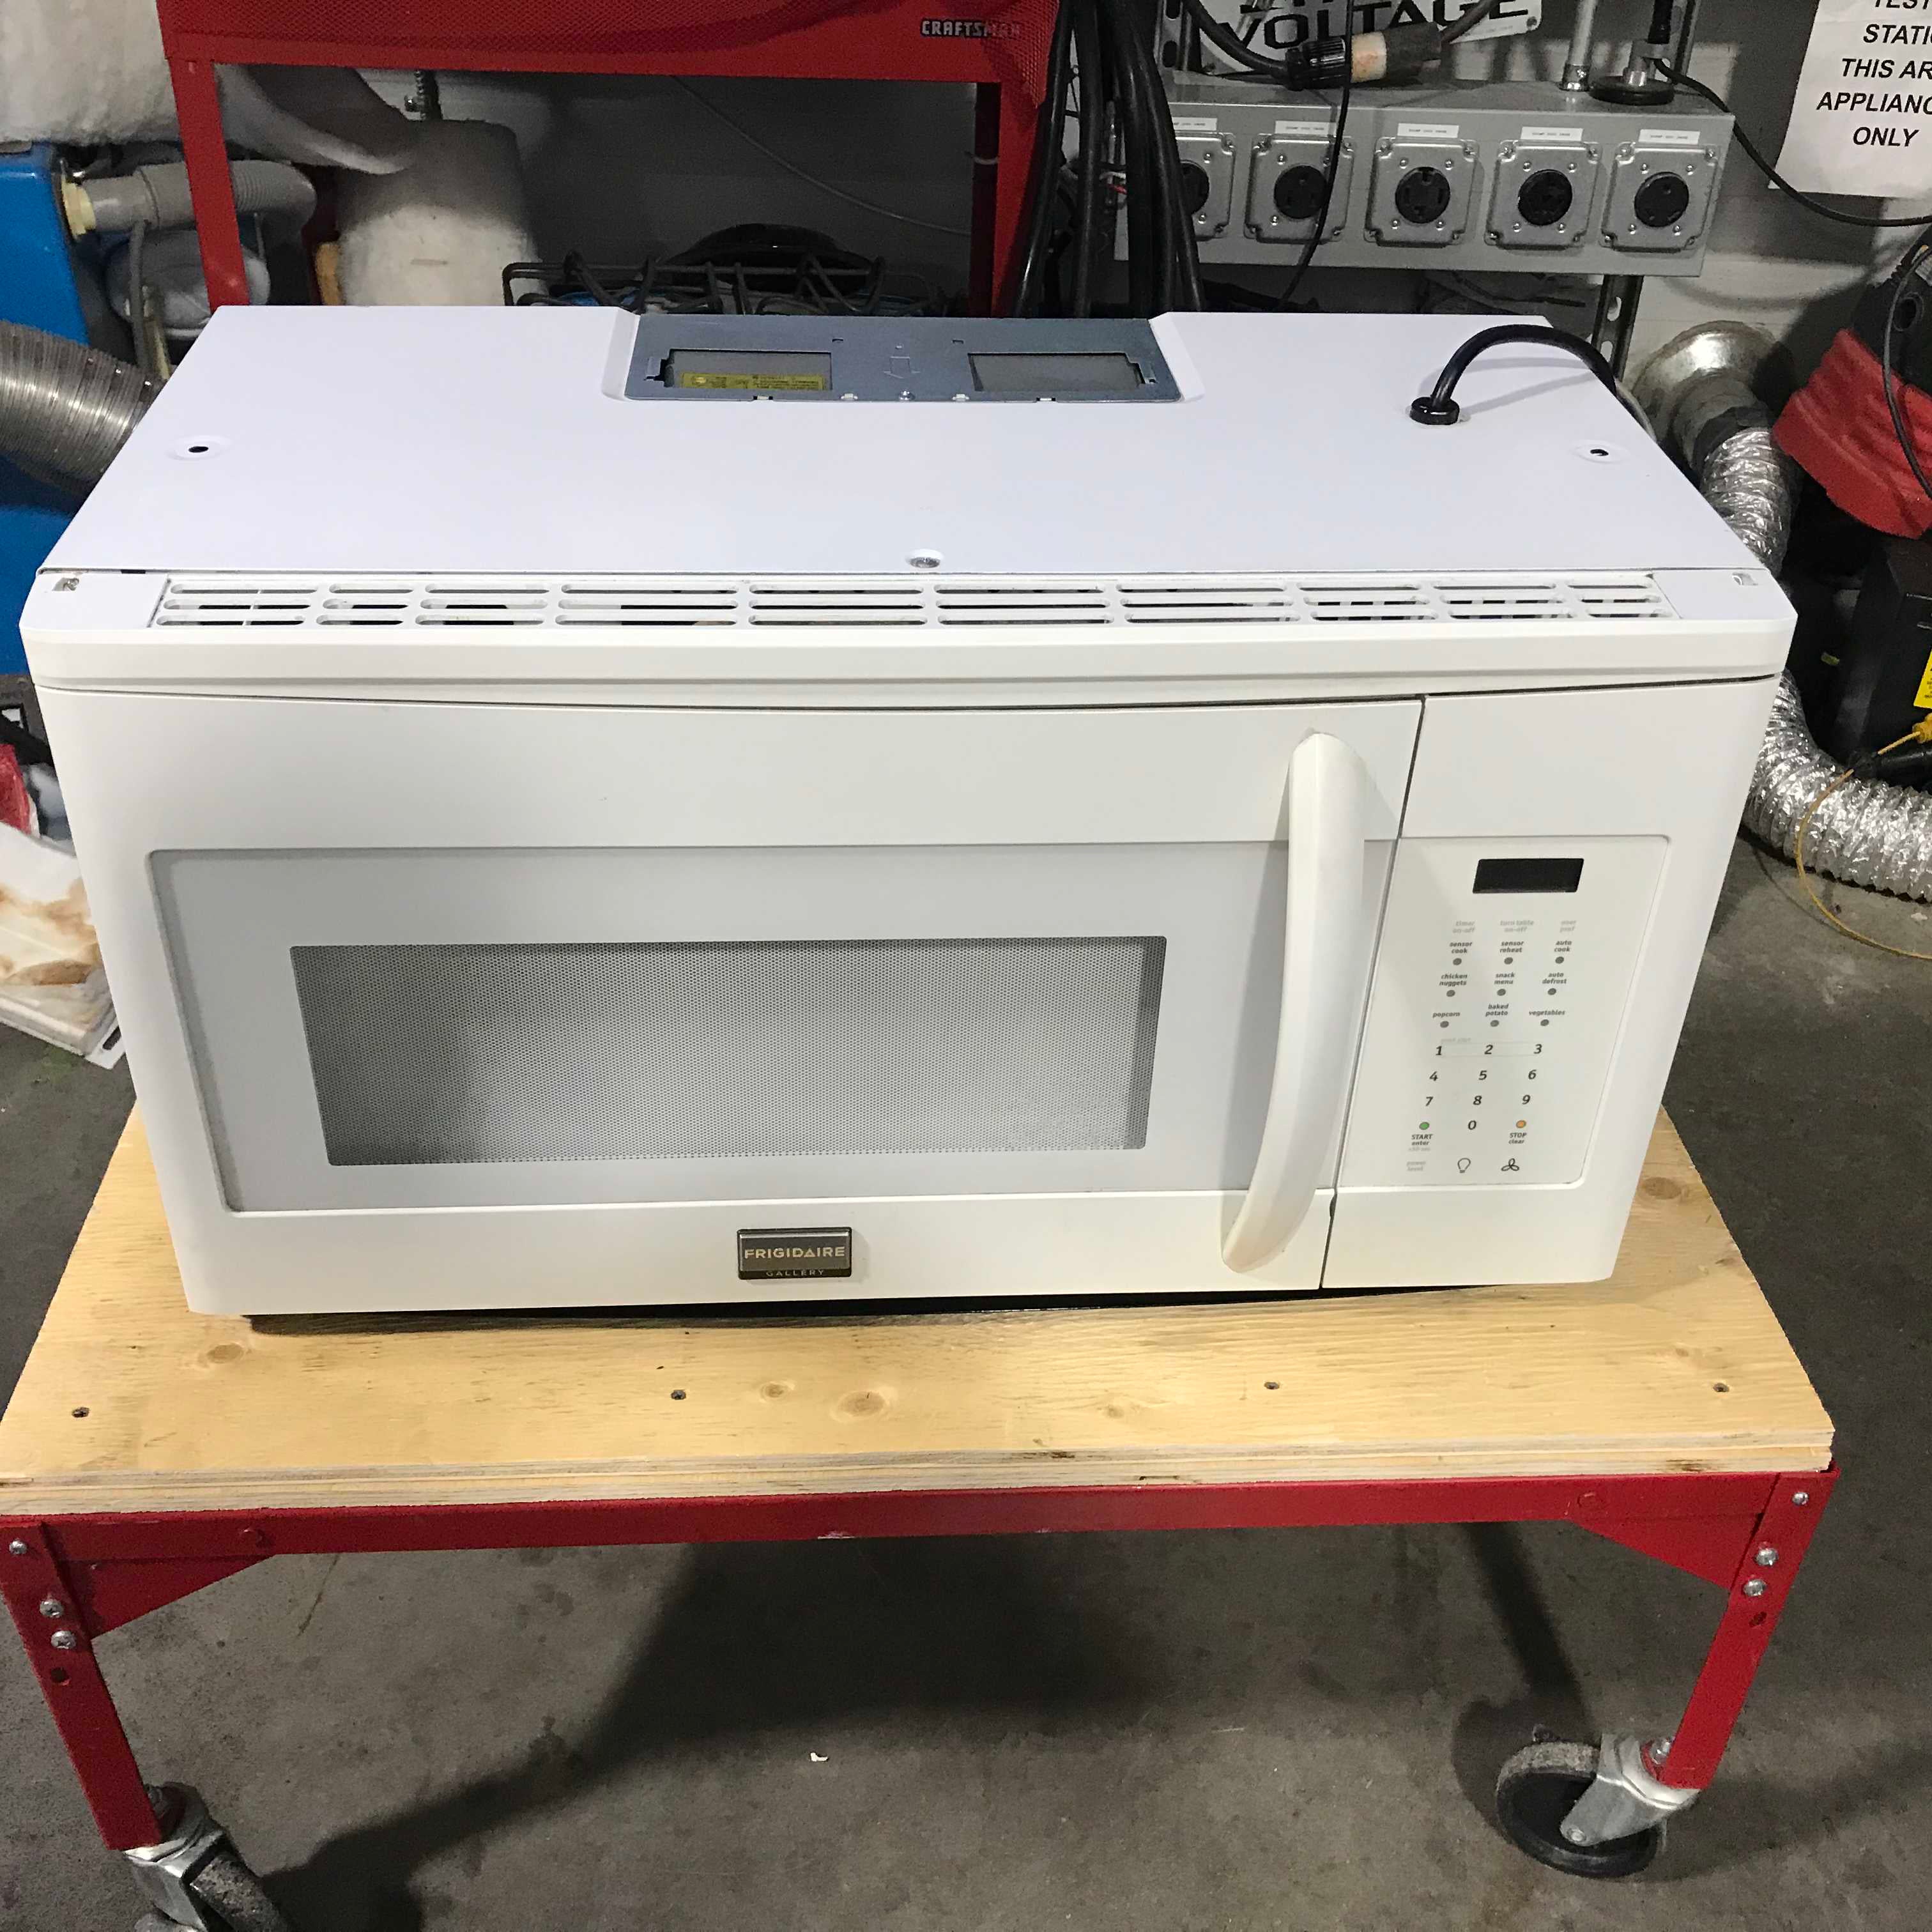 30"x 18"x 16" Frigidaire White Over The Range Microwave